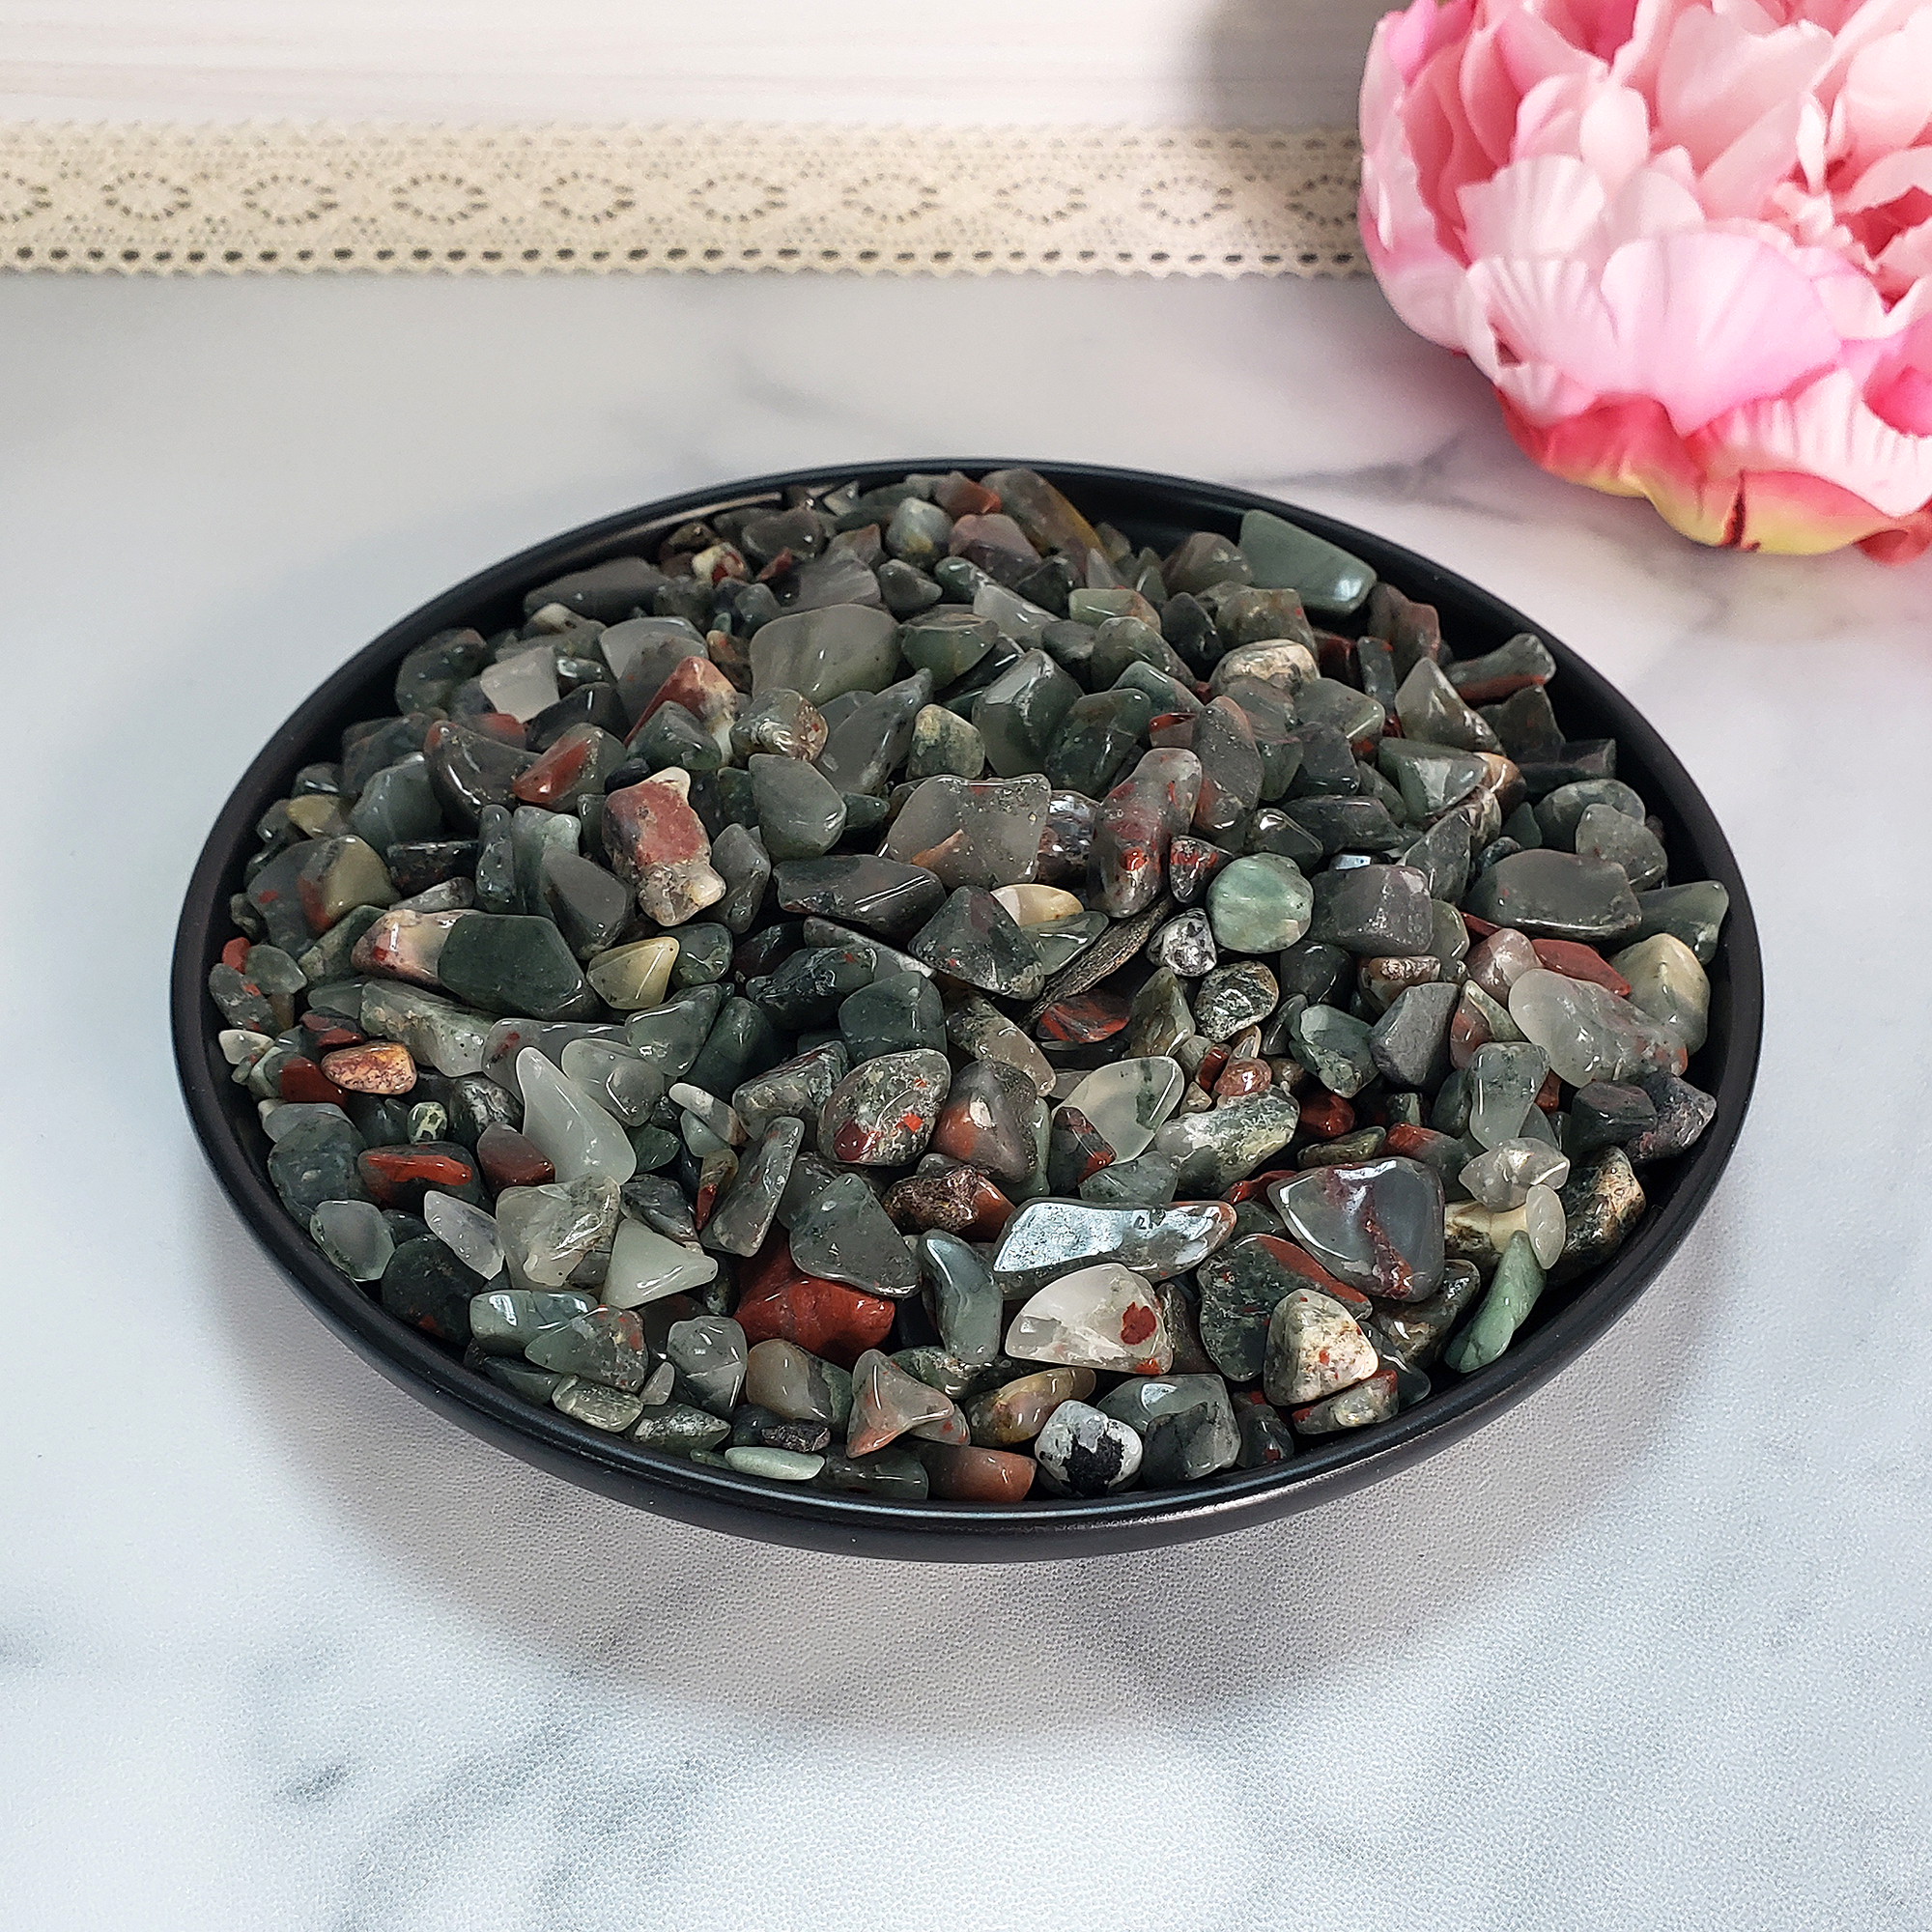 Seftonite Bloodstone Natural Gemstone Chips By the Ounce - Bloodstone Crystal Chips on Black Ceramic Plate